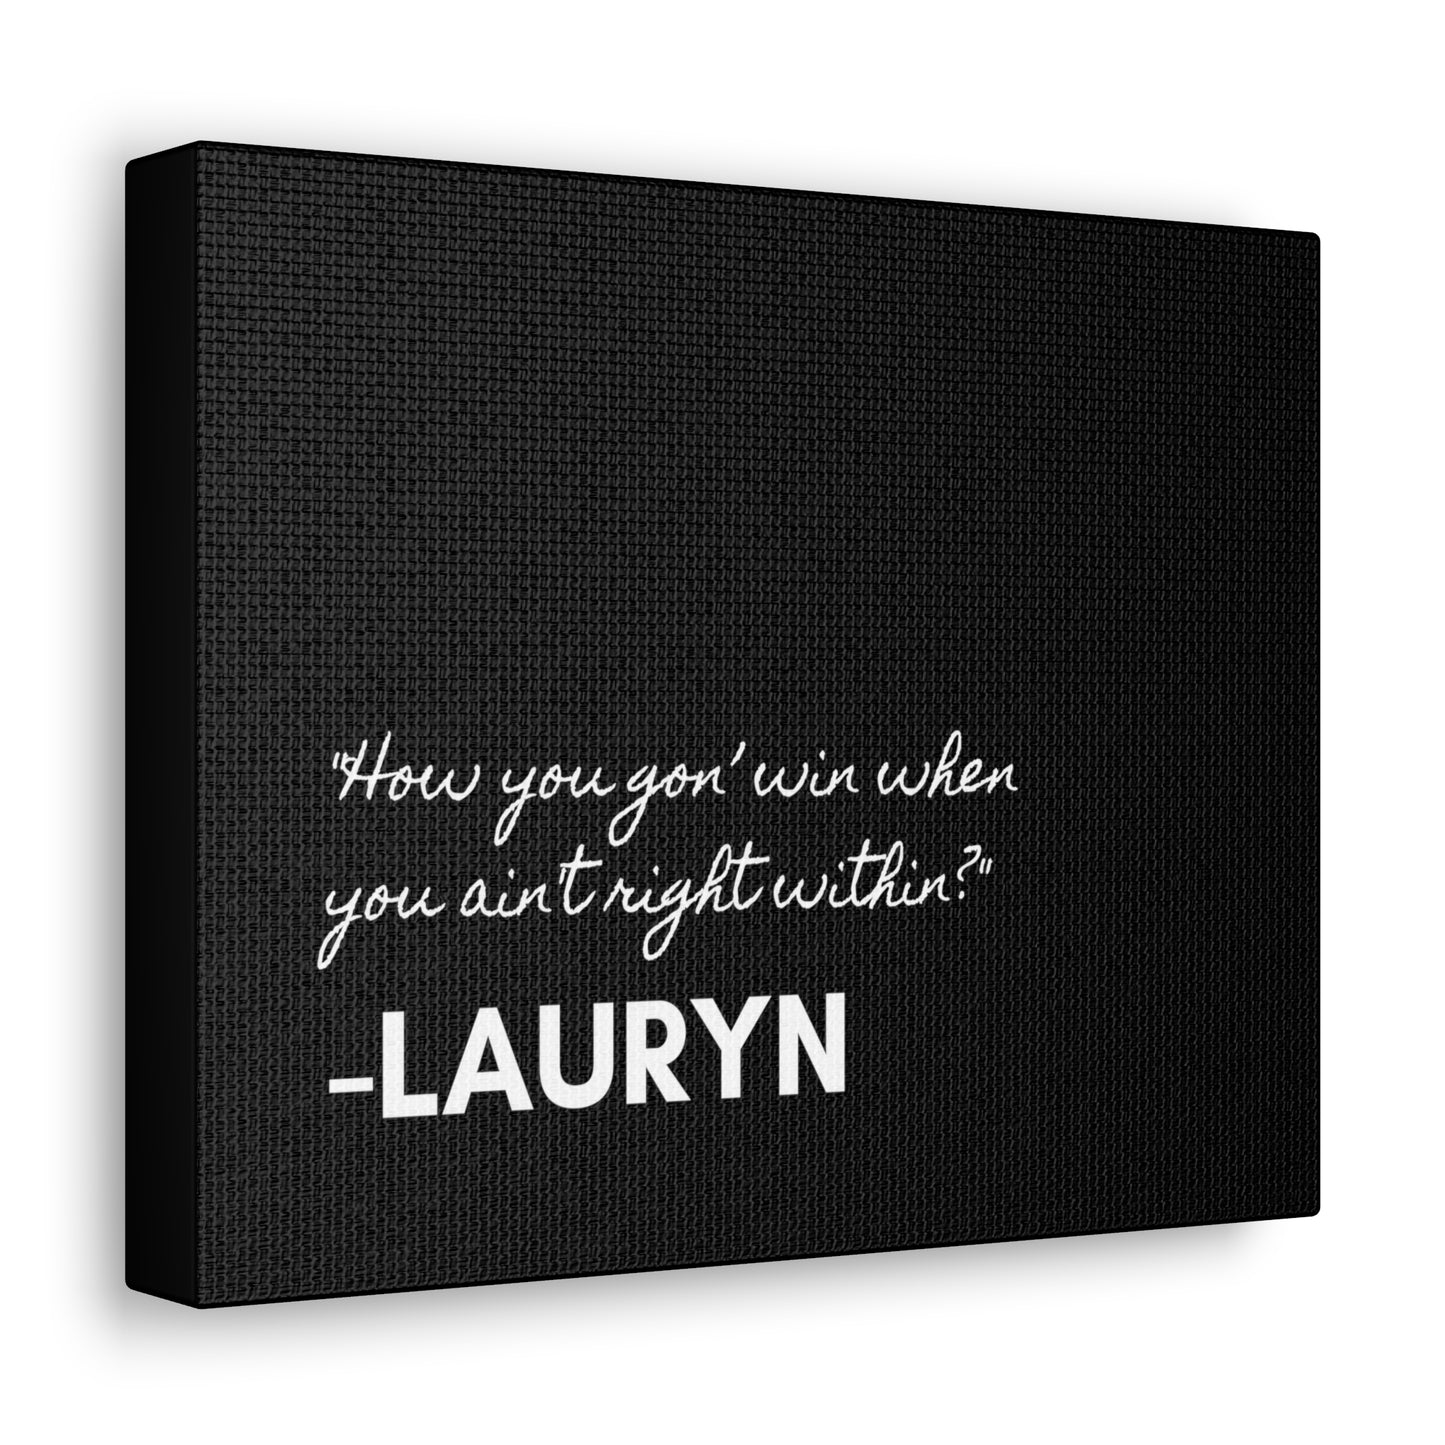 Words from Lauryn